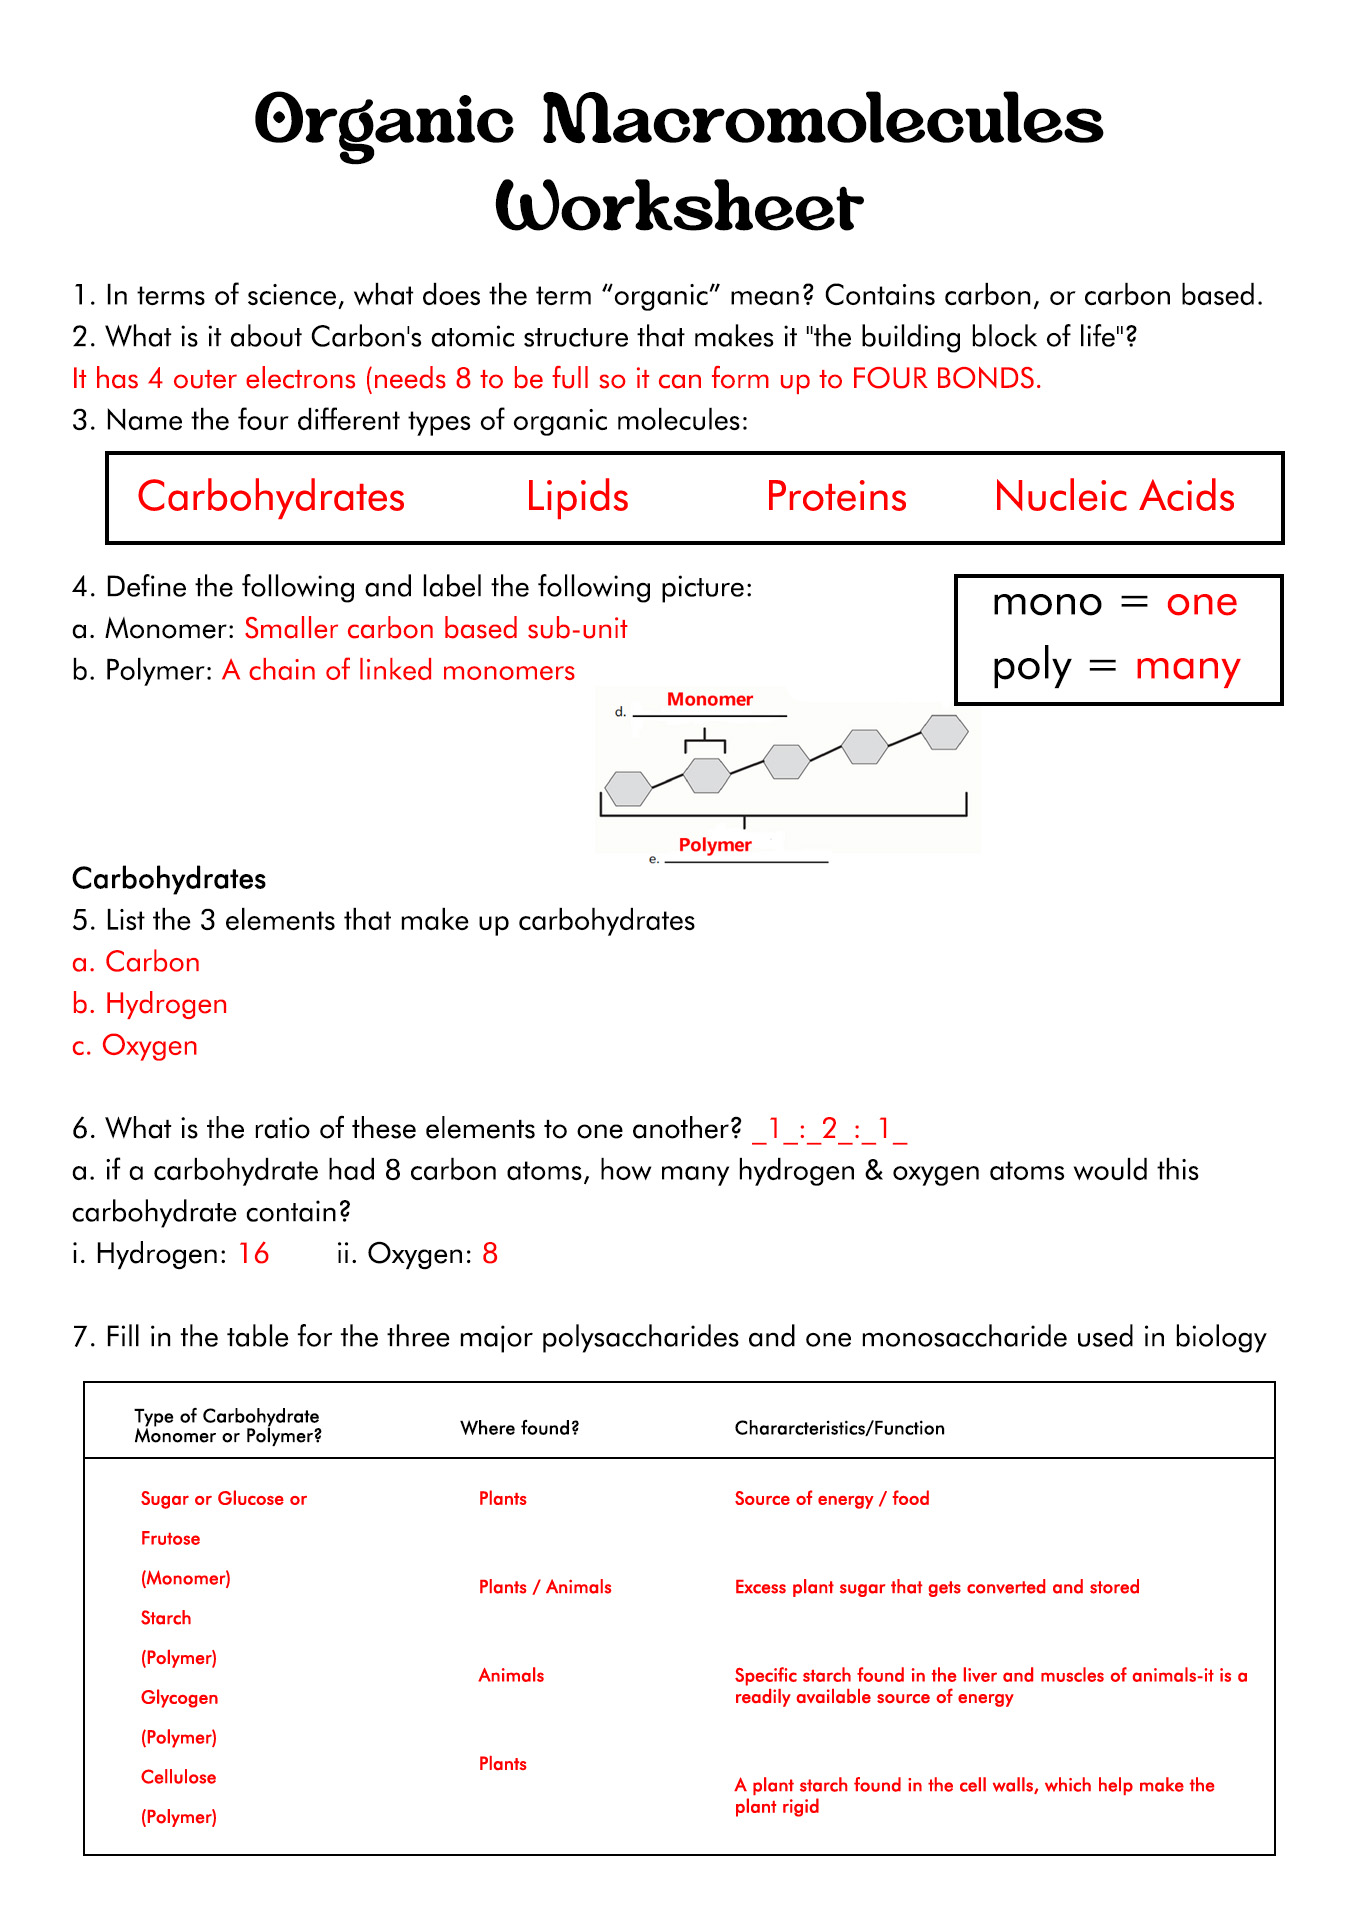 11-best-images-of-organic-chem-worksheet-with-answers-organic-molecules-worksheet-review